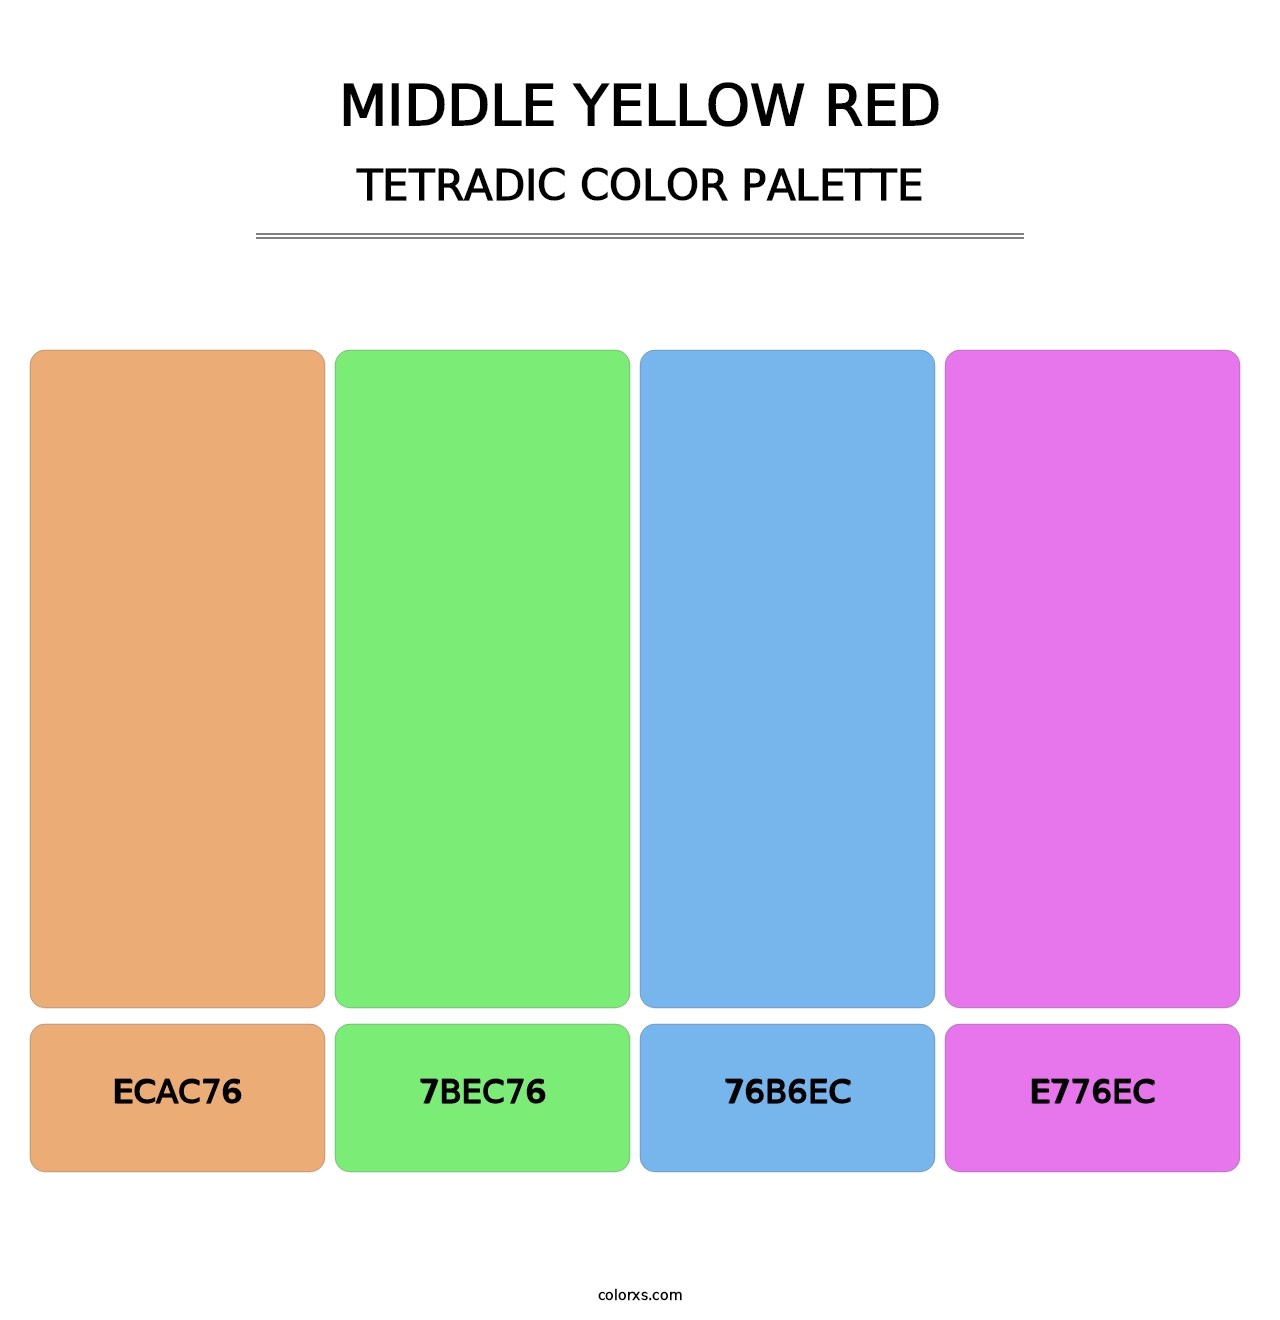 Middle Yellow Red - Tetradic Color Palette